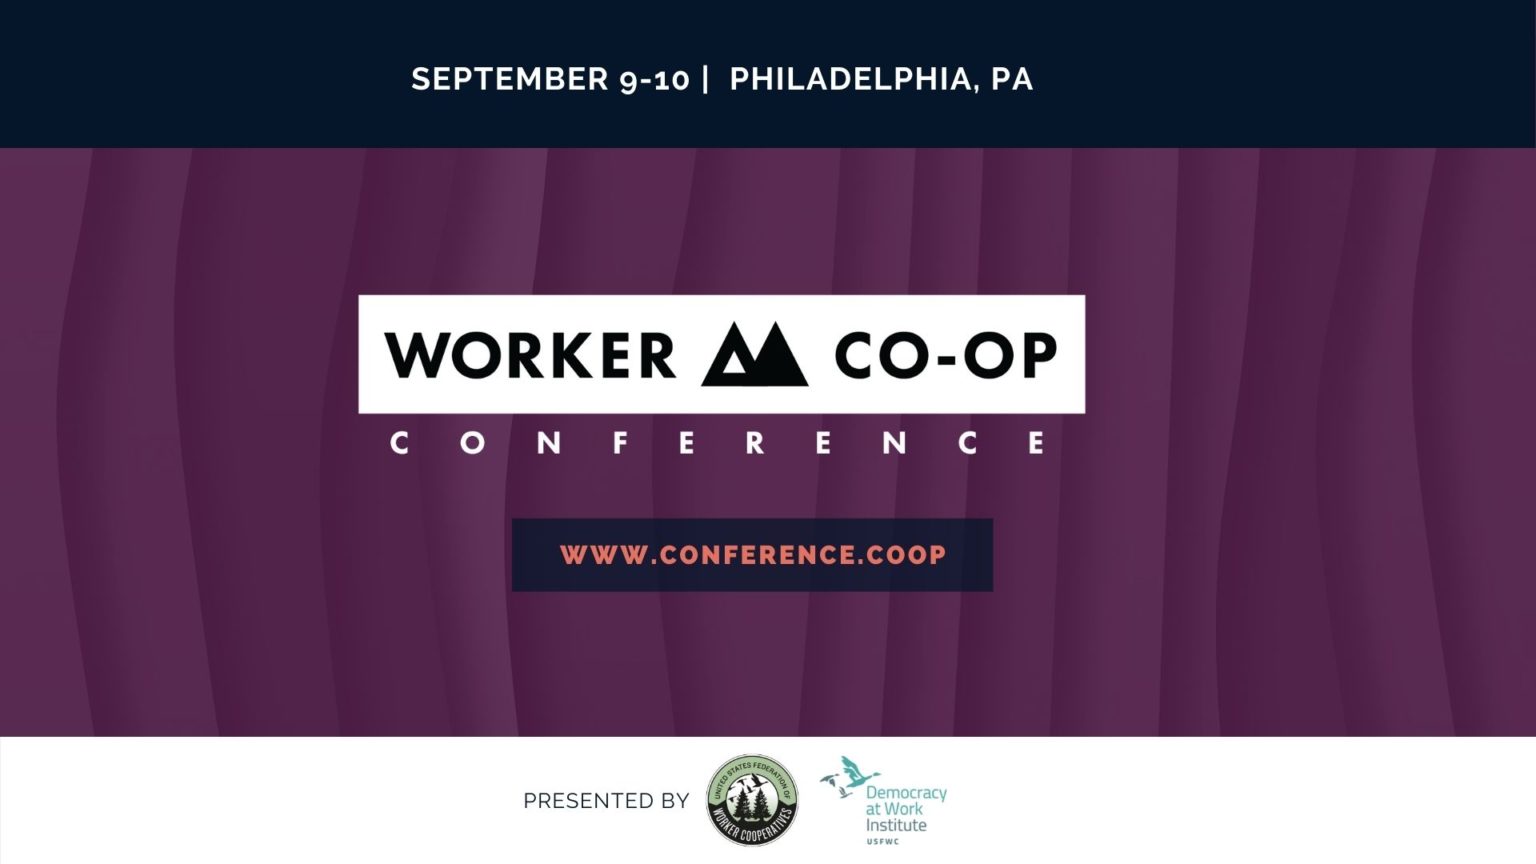 Save the Date for the Worker Coop Conference U.S. Federation of